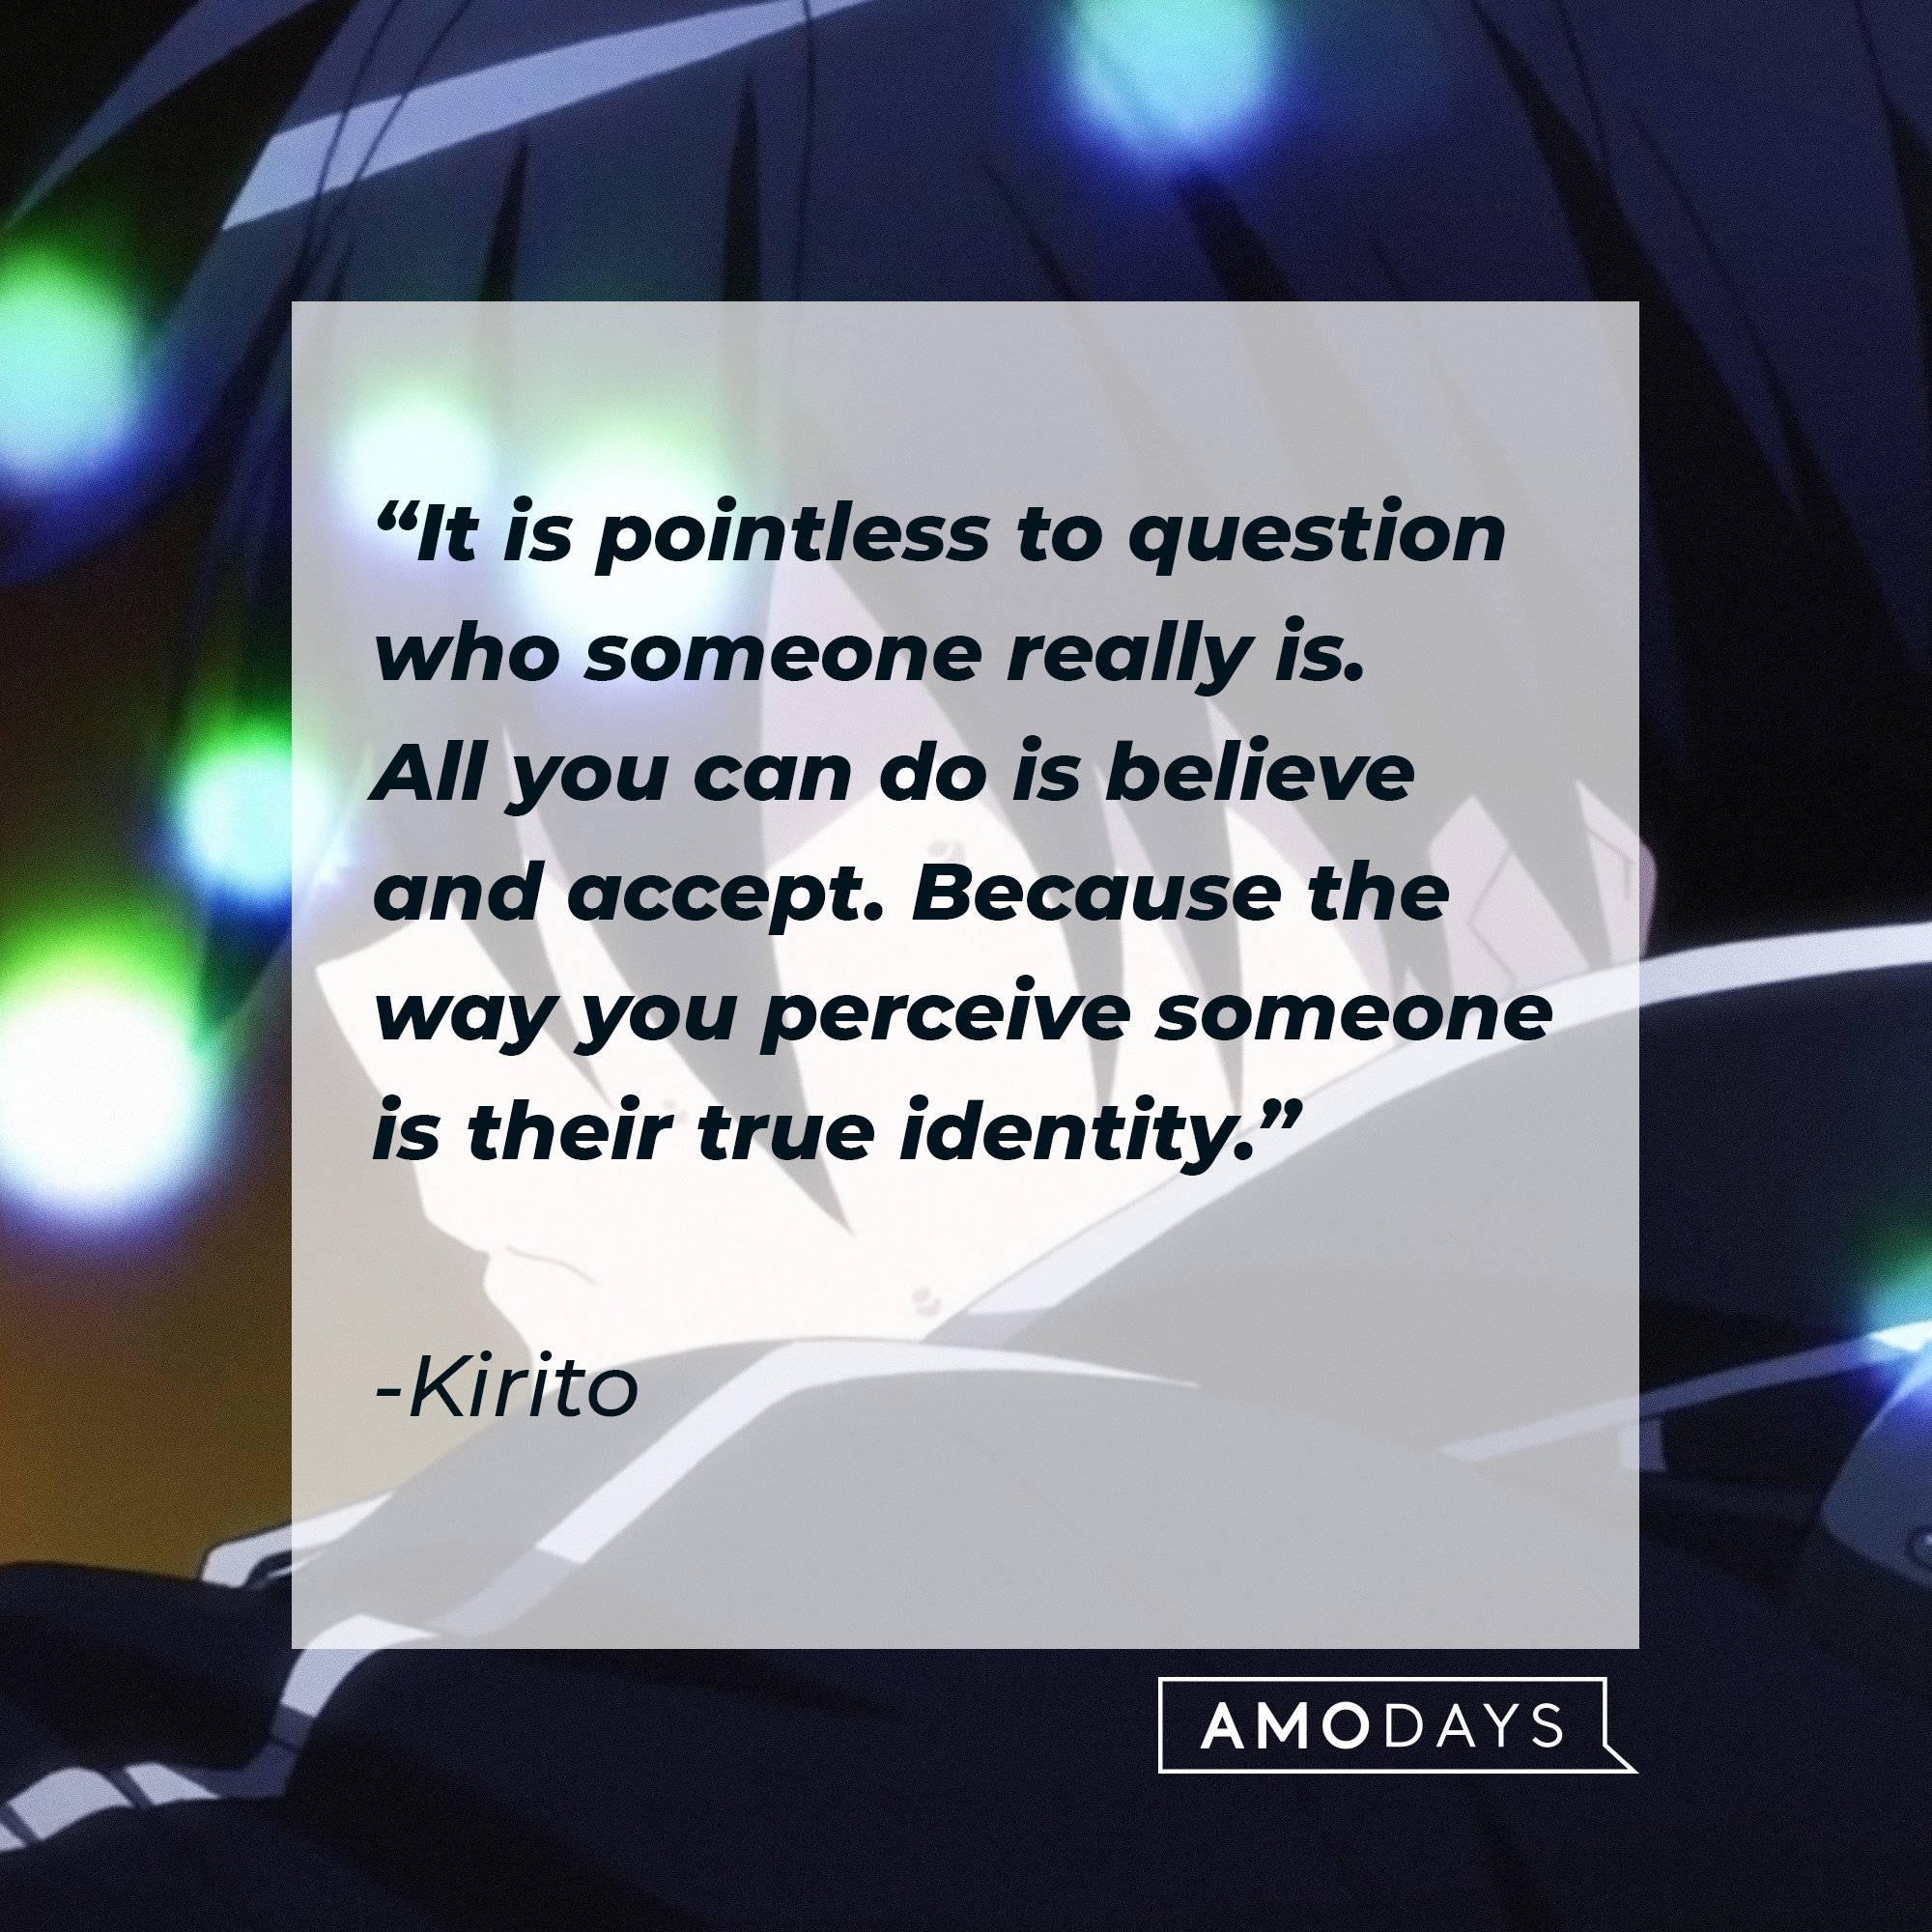 Kirito’s quote: “It is pointless to question who someone really is. All you can do is believe and accept. Because the way you perceive someone is their true identity.” |  Image: AmoDays